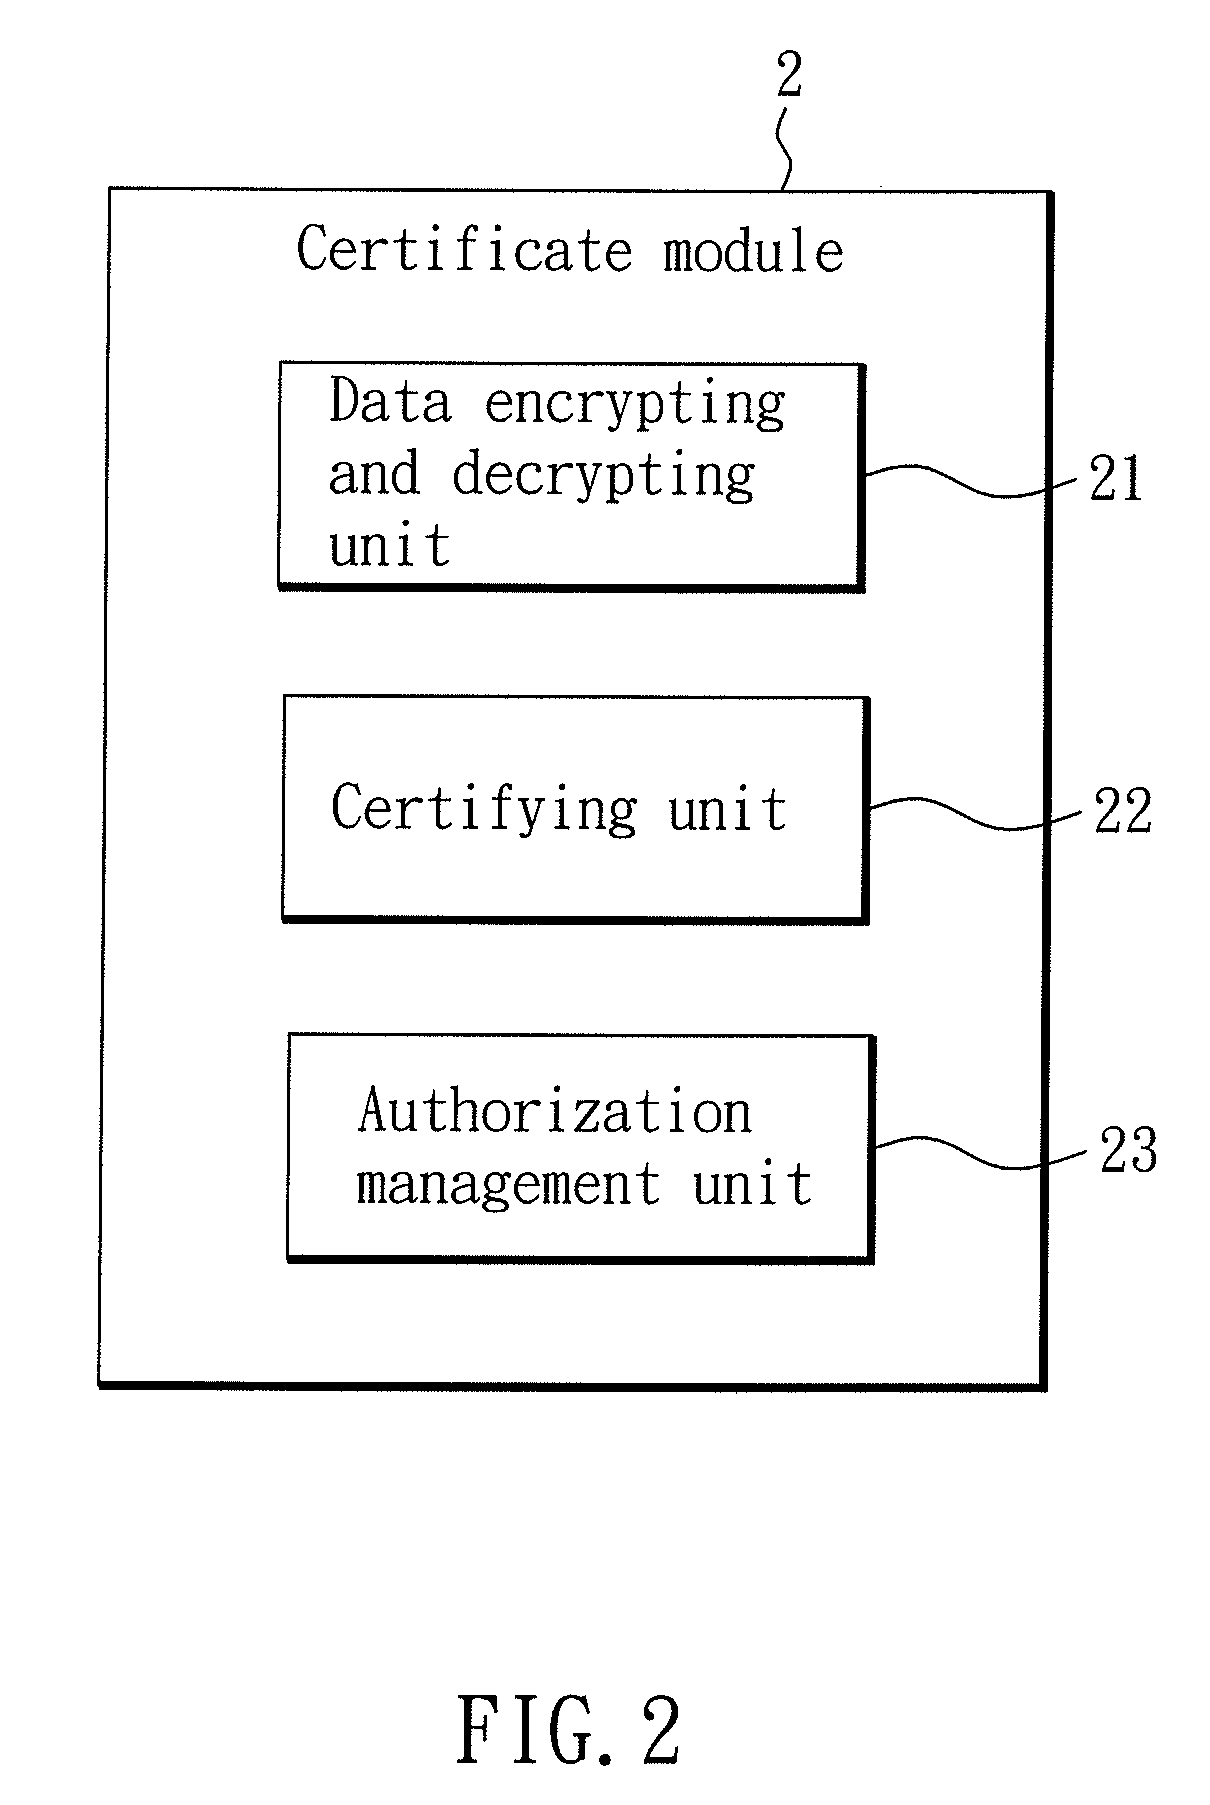 Electronic medical record system, method for storing medical record data in the medical record system, and a portable electronic device loading the electronic medical record system therein